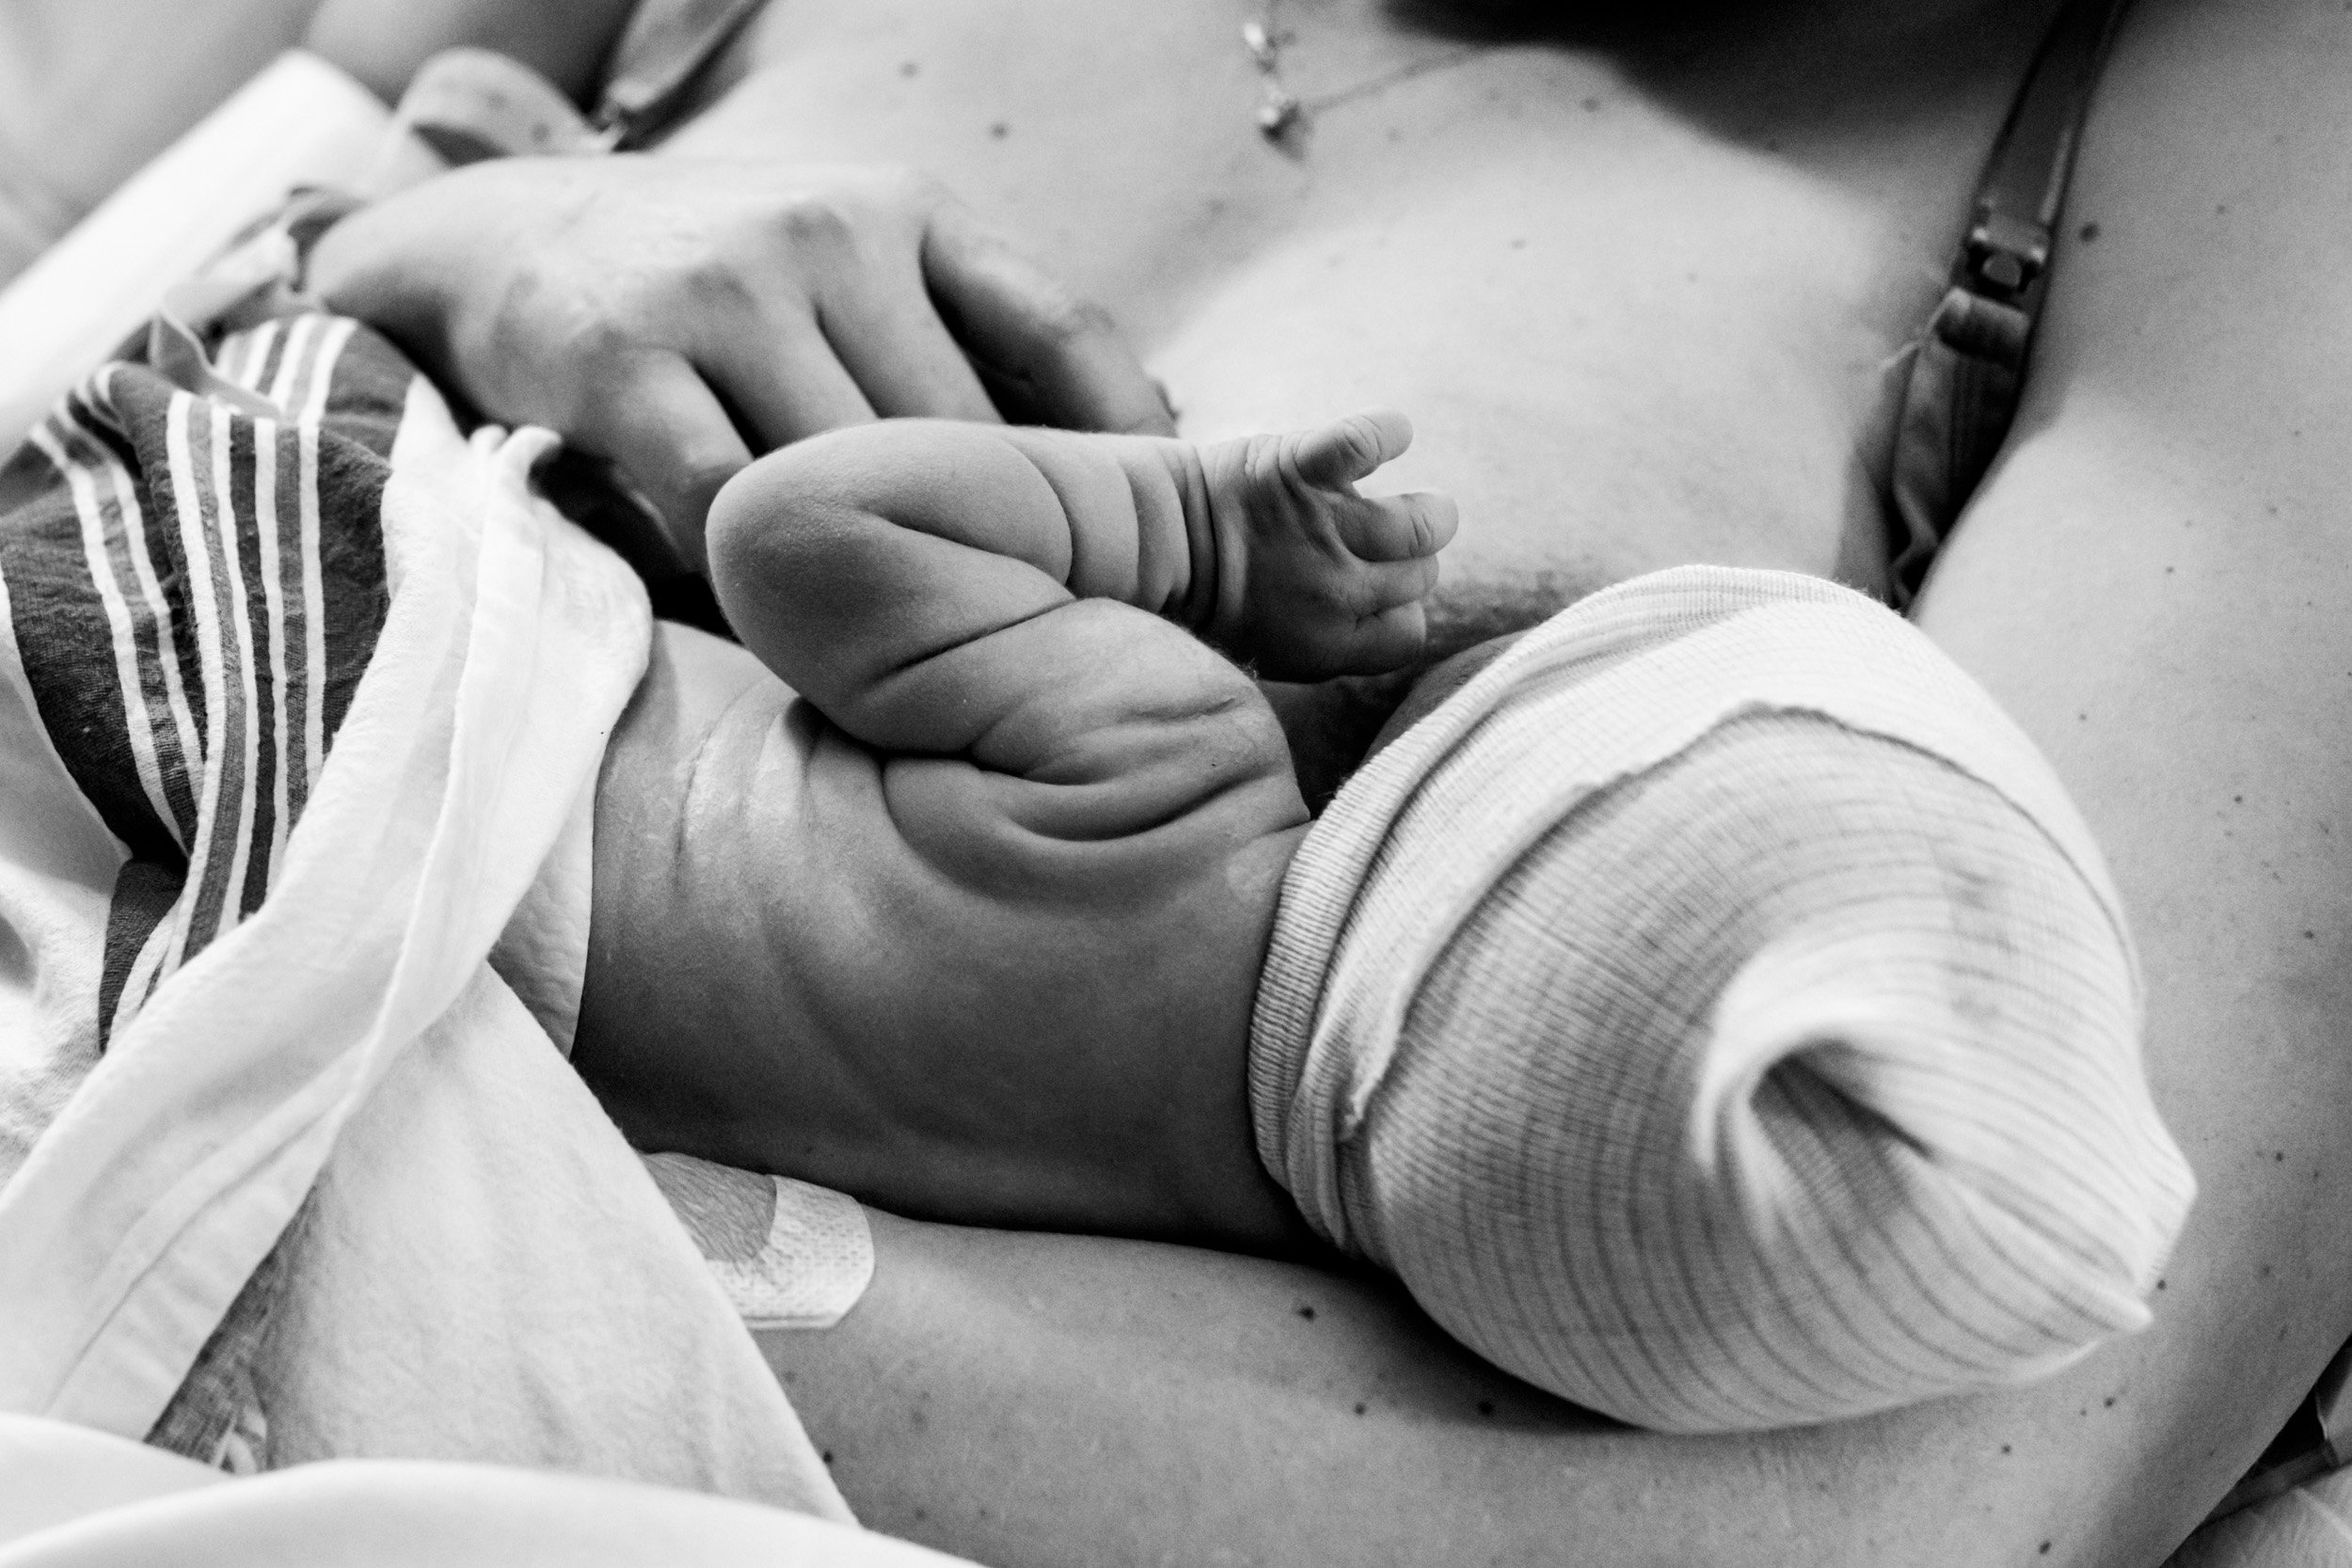 black and white photo showing textural details of newborn baby